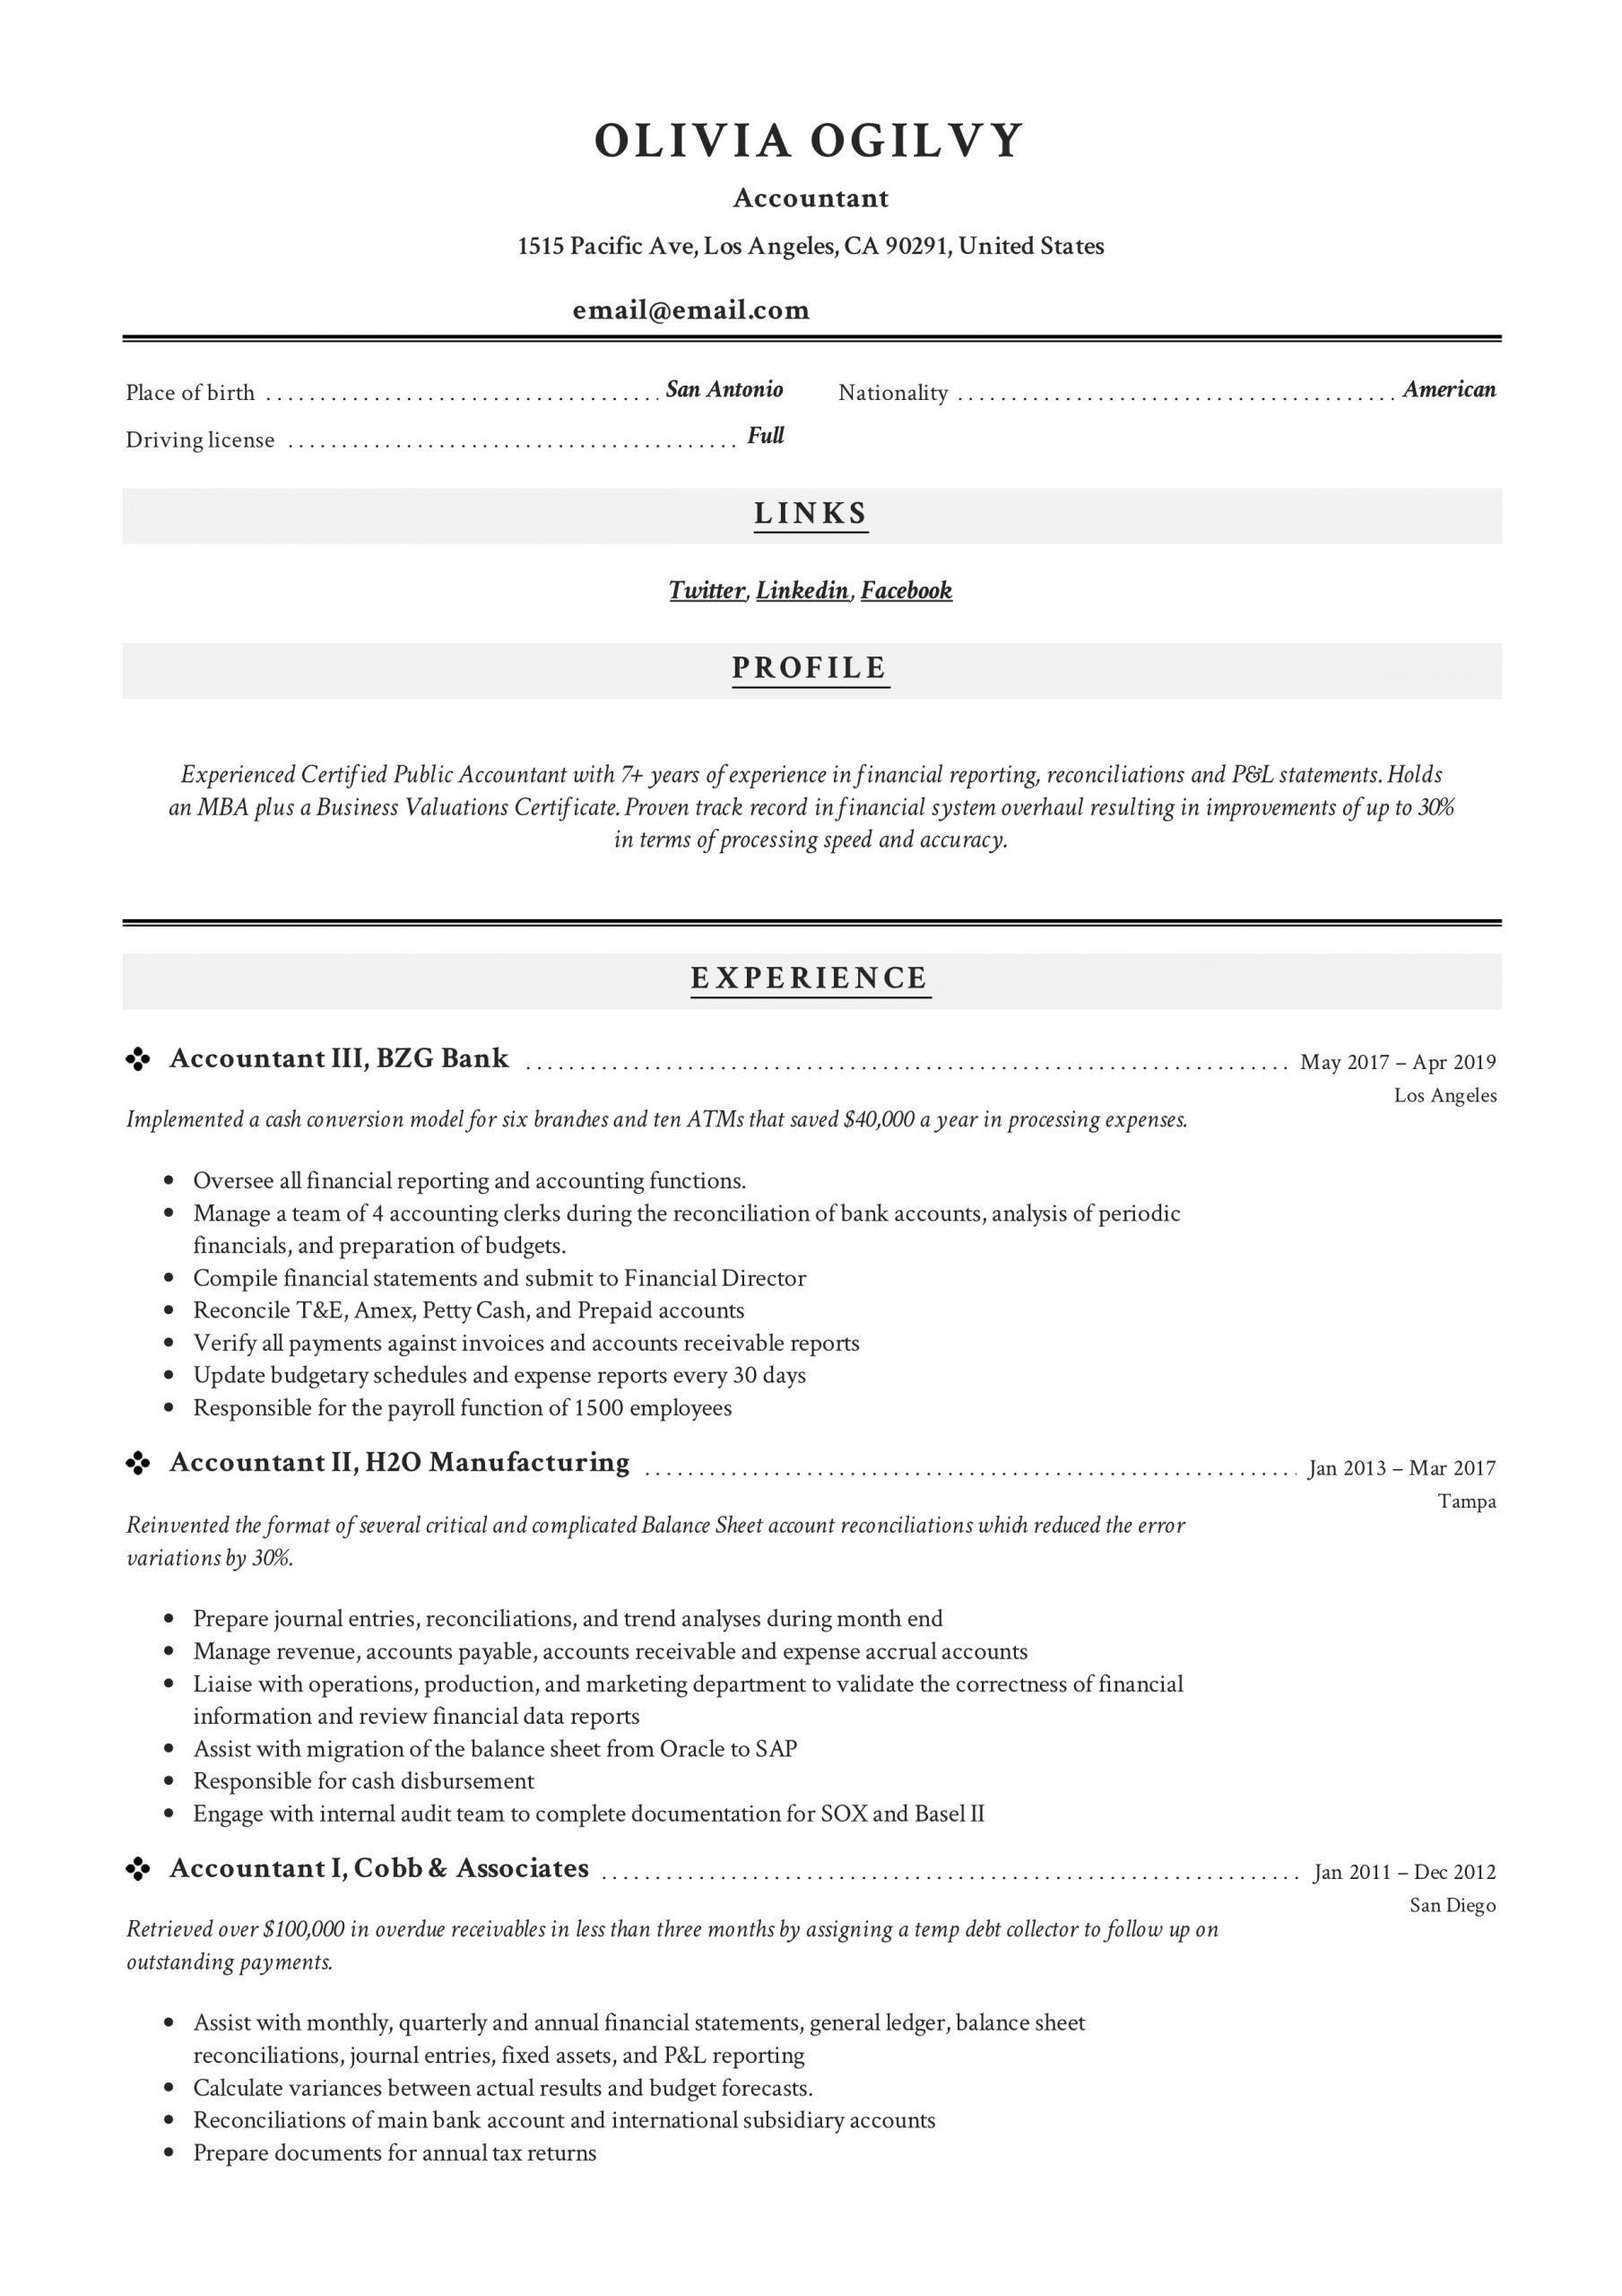 Sample Of Functional Resume for Accountant Accountant Resume & Writing Guide  12 Resume Templates Pdf